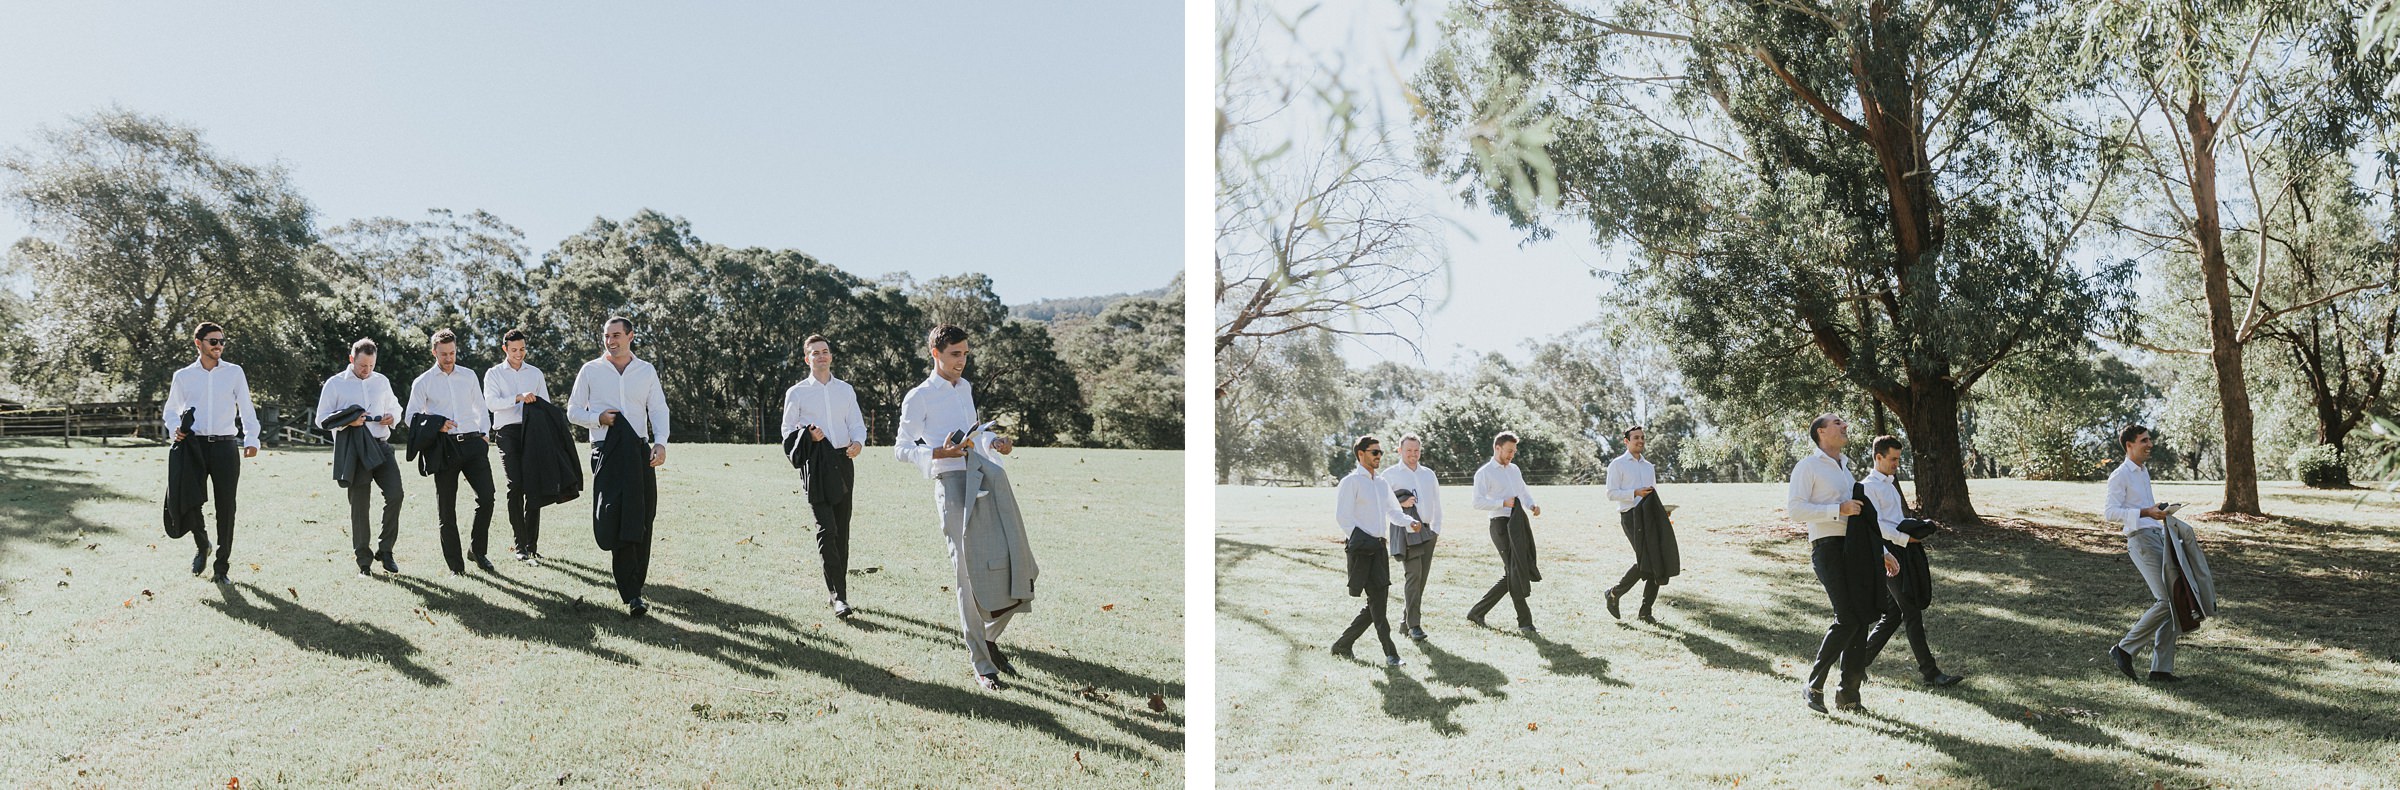 natural candid wedding photography by jonathan david in berry